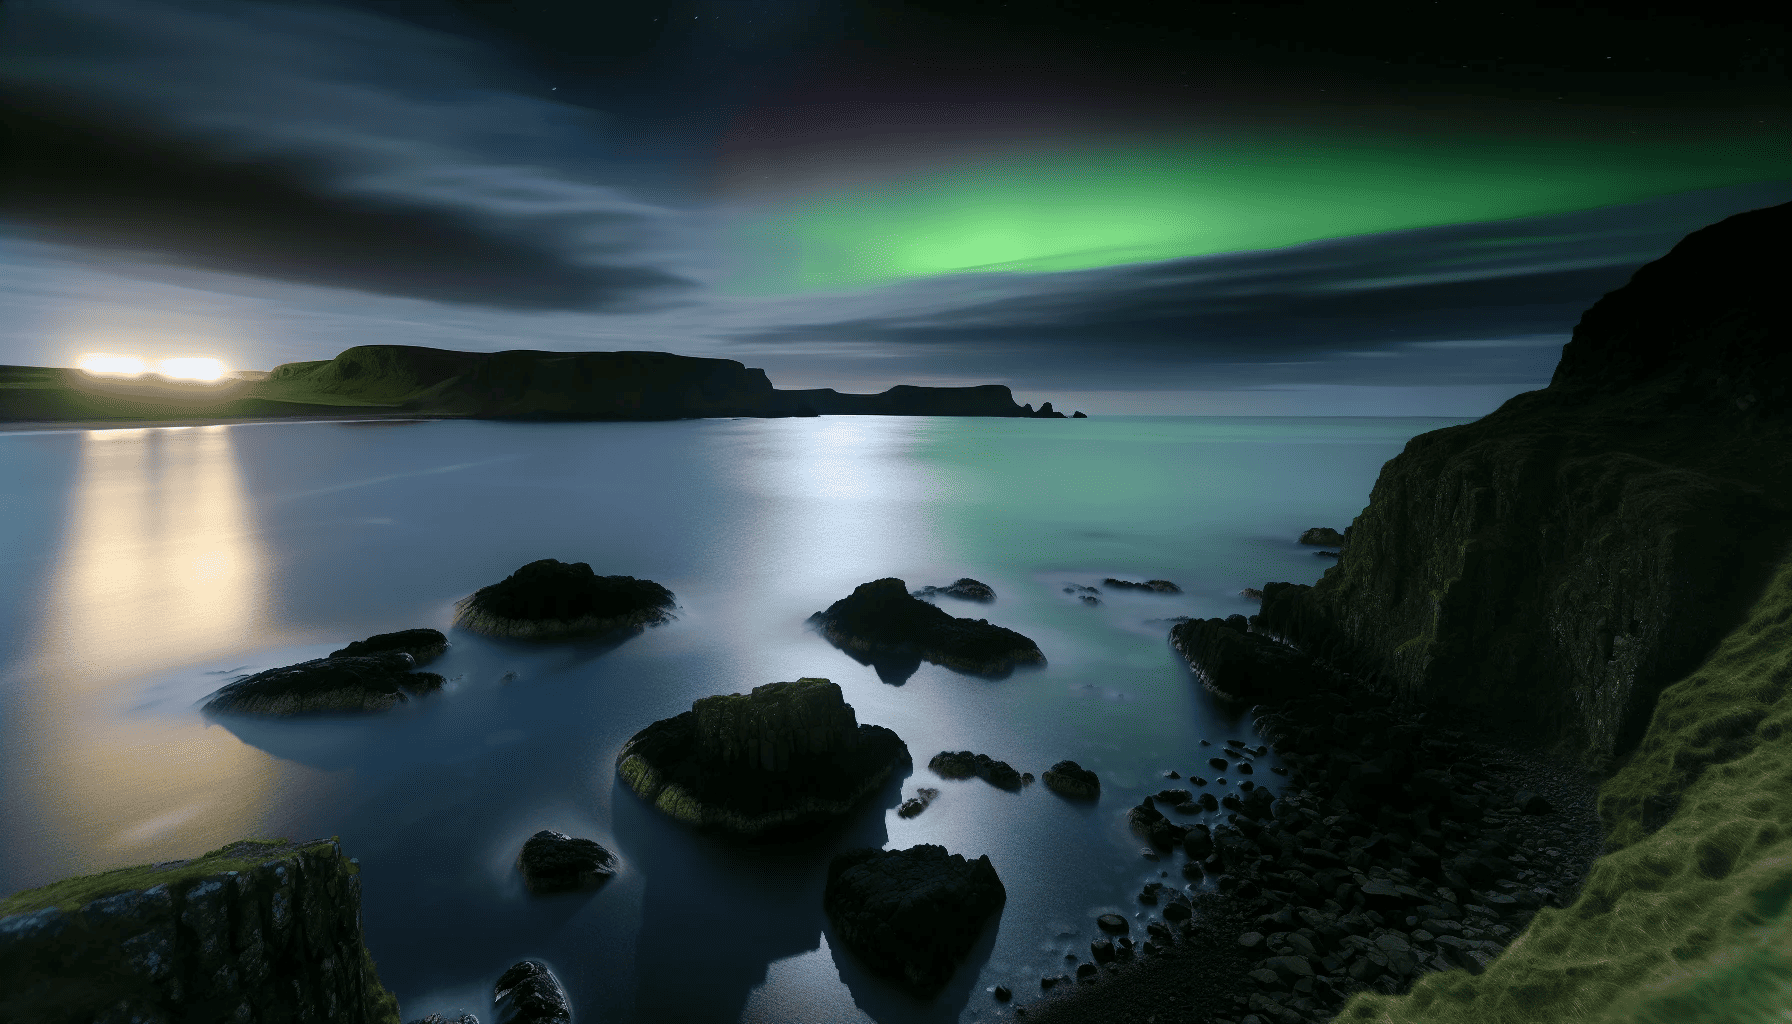 Secluded spot along the Antrim Coast, perfect for experiencing the Northern Lights in Northern Ireland